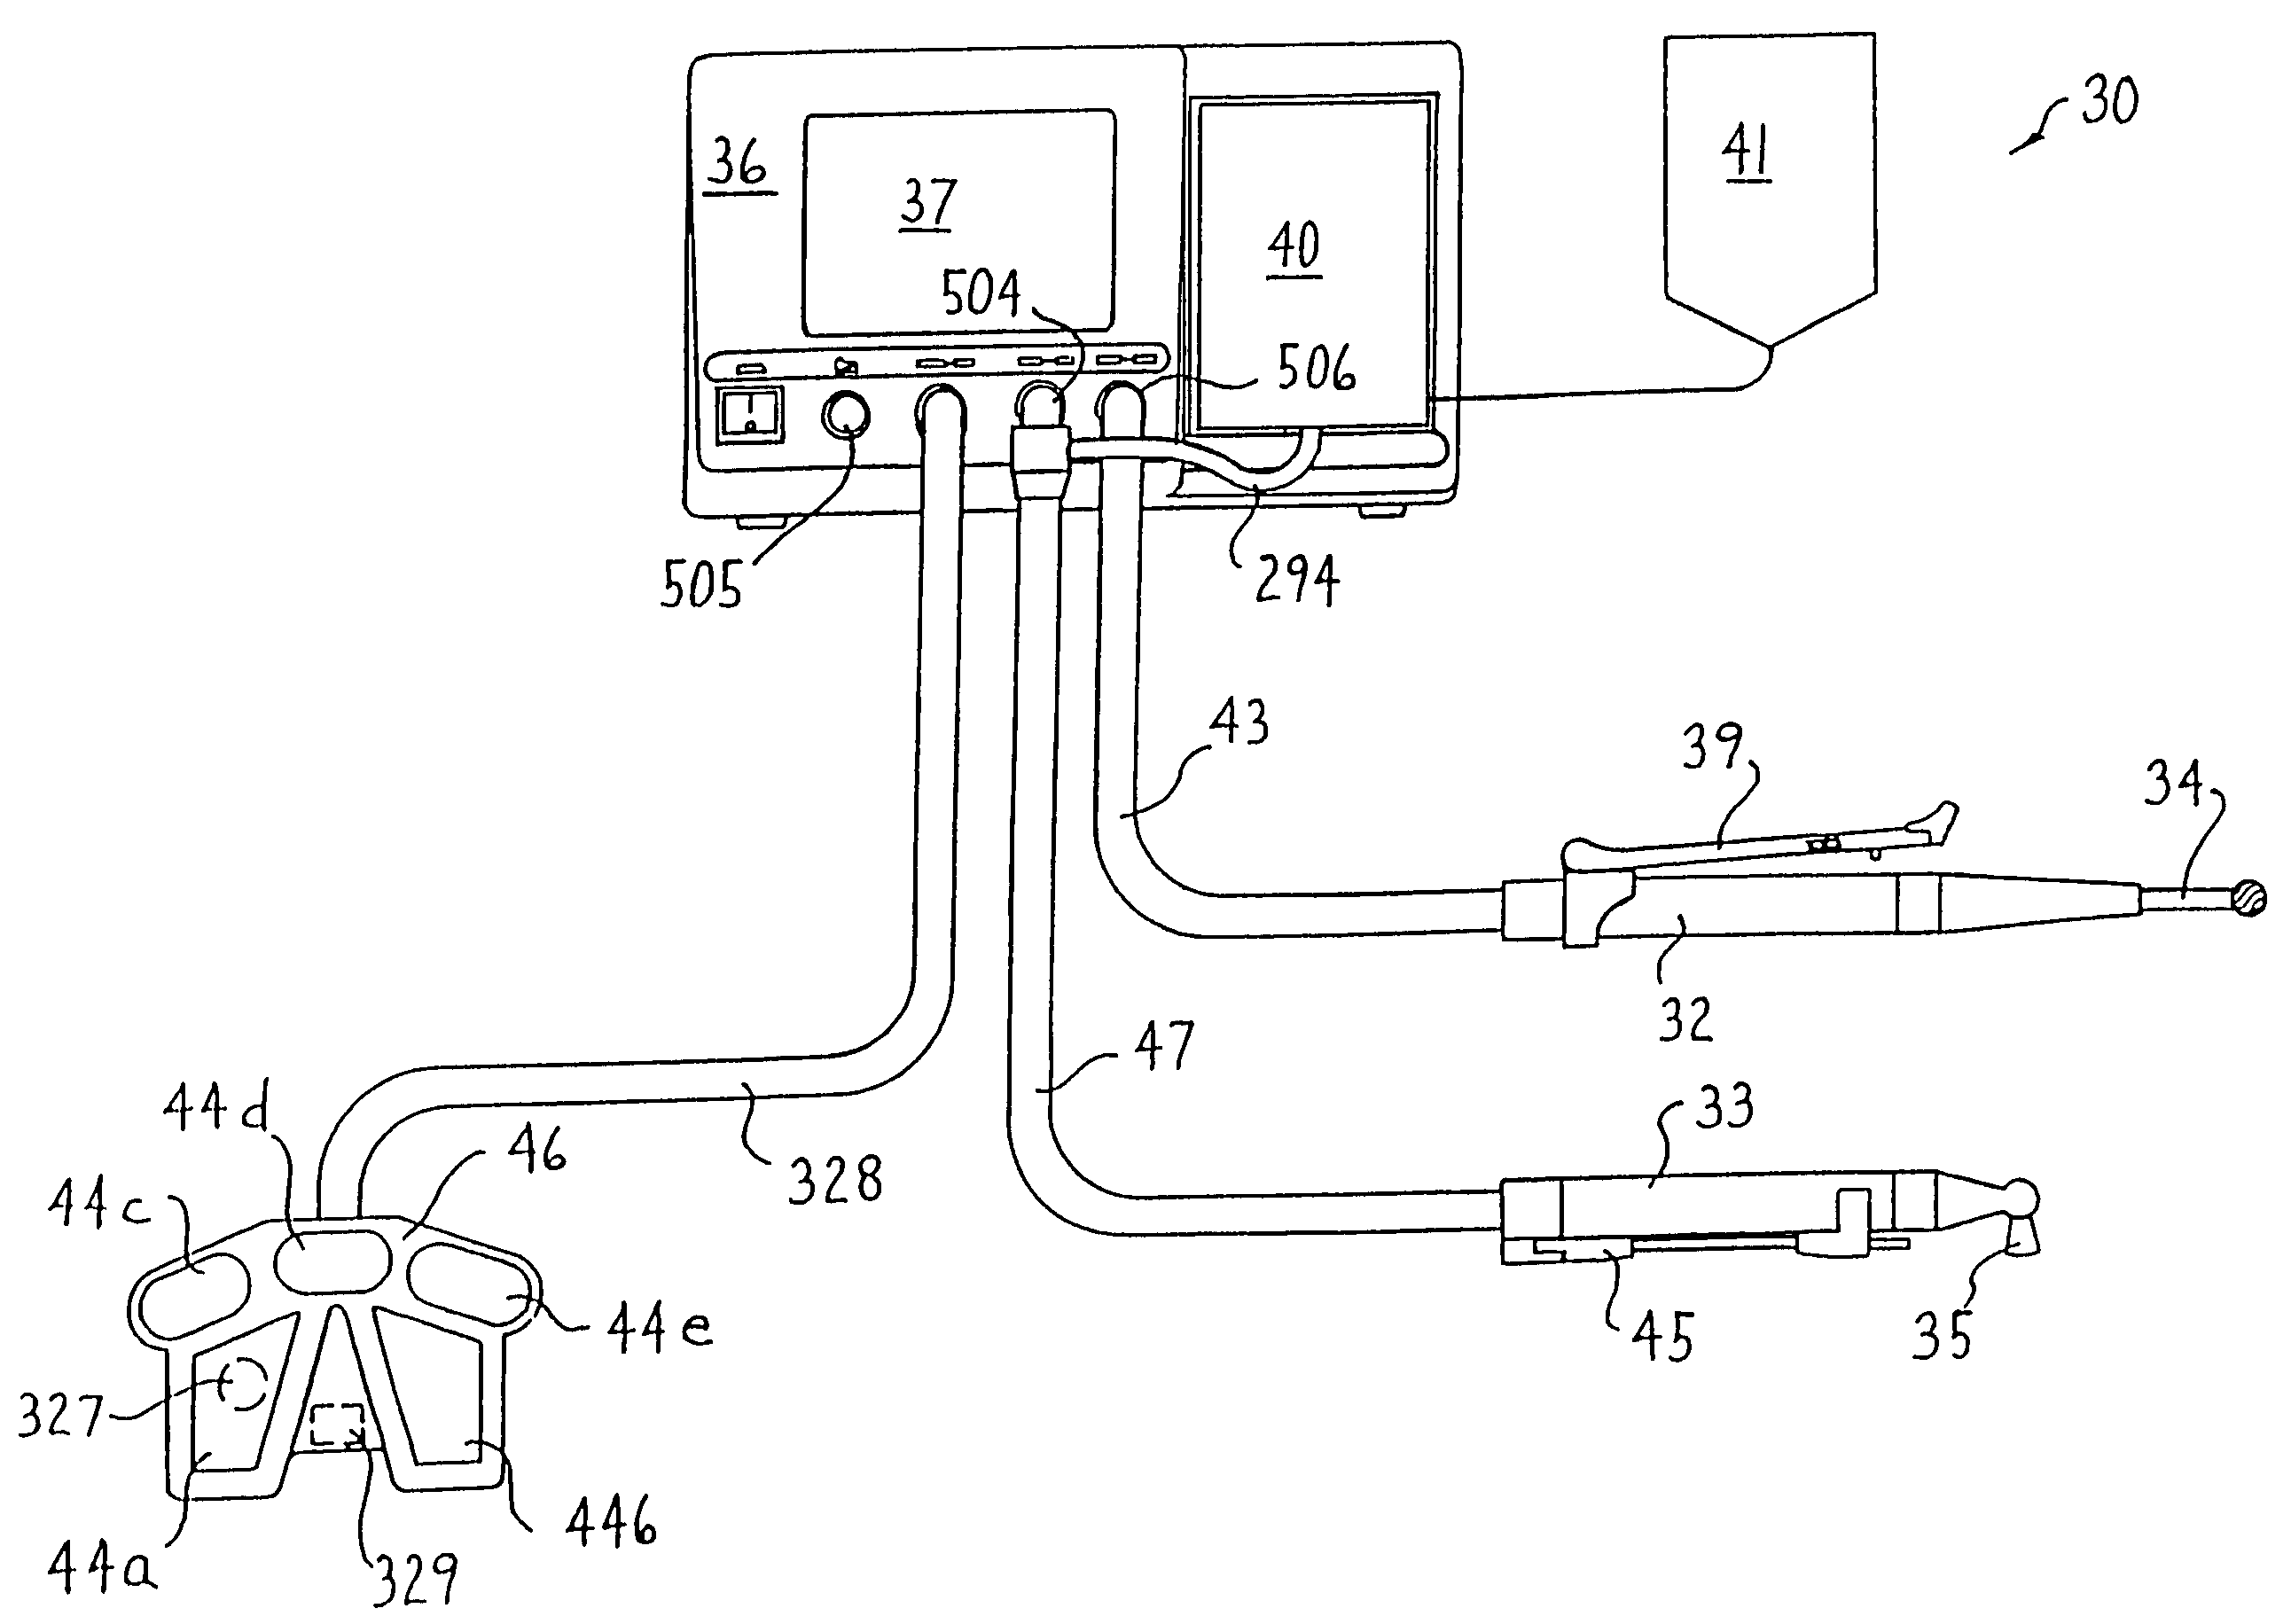 Surgical tool system including plural powered handpieces and a console to which the handpieces are simultaneously attached, the console able to energize each handpiece based on data stored in a memory integral with each handpiece